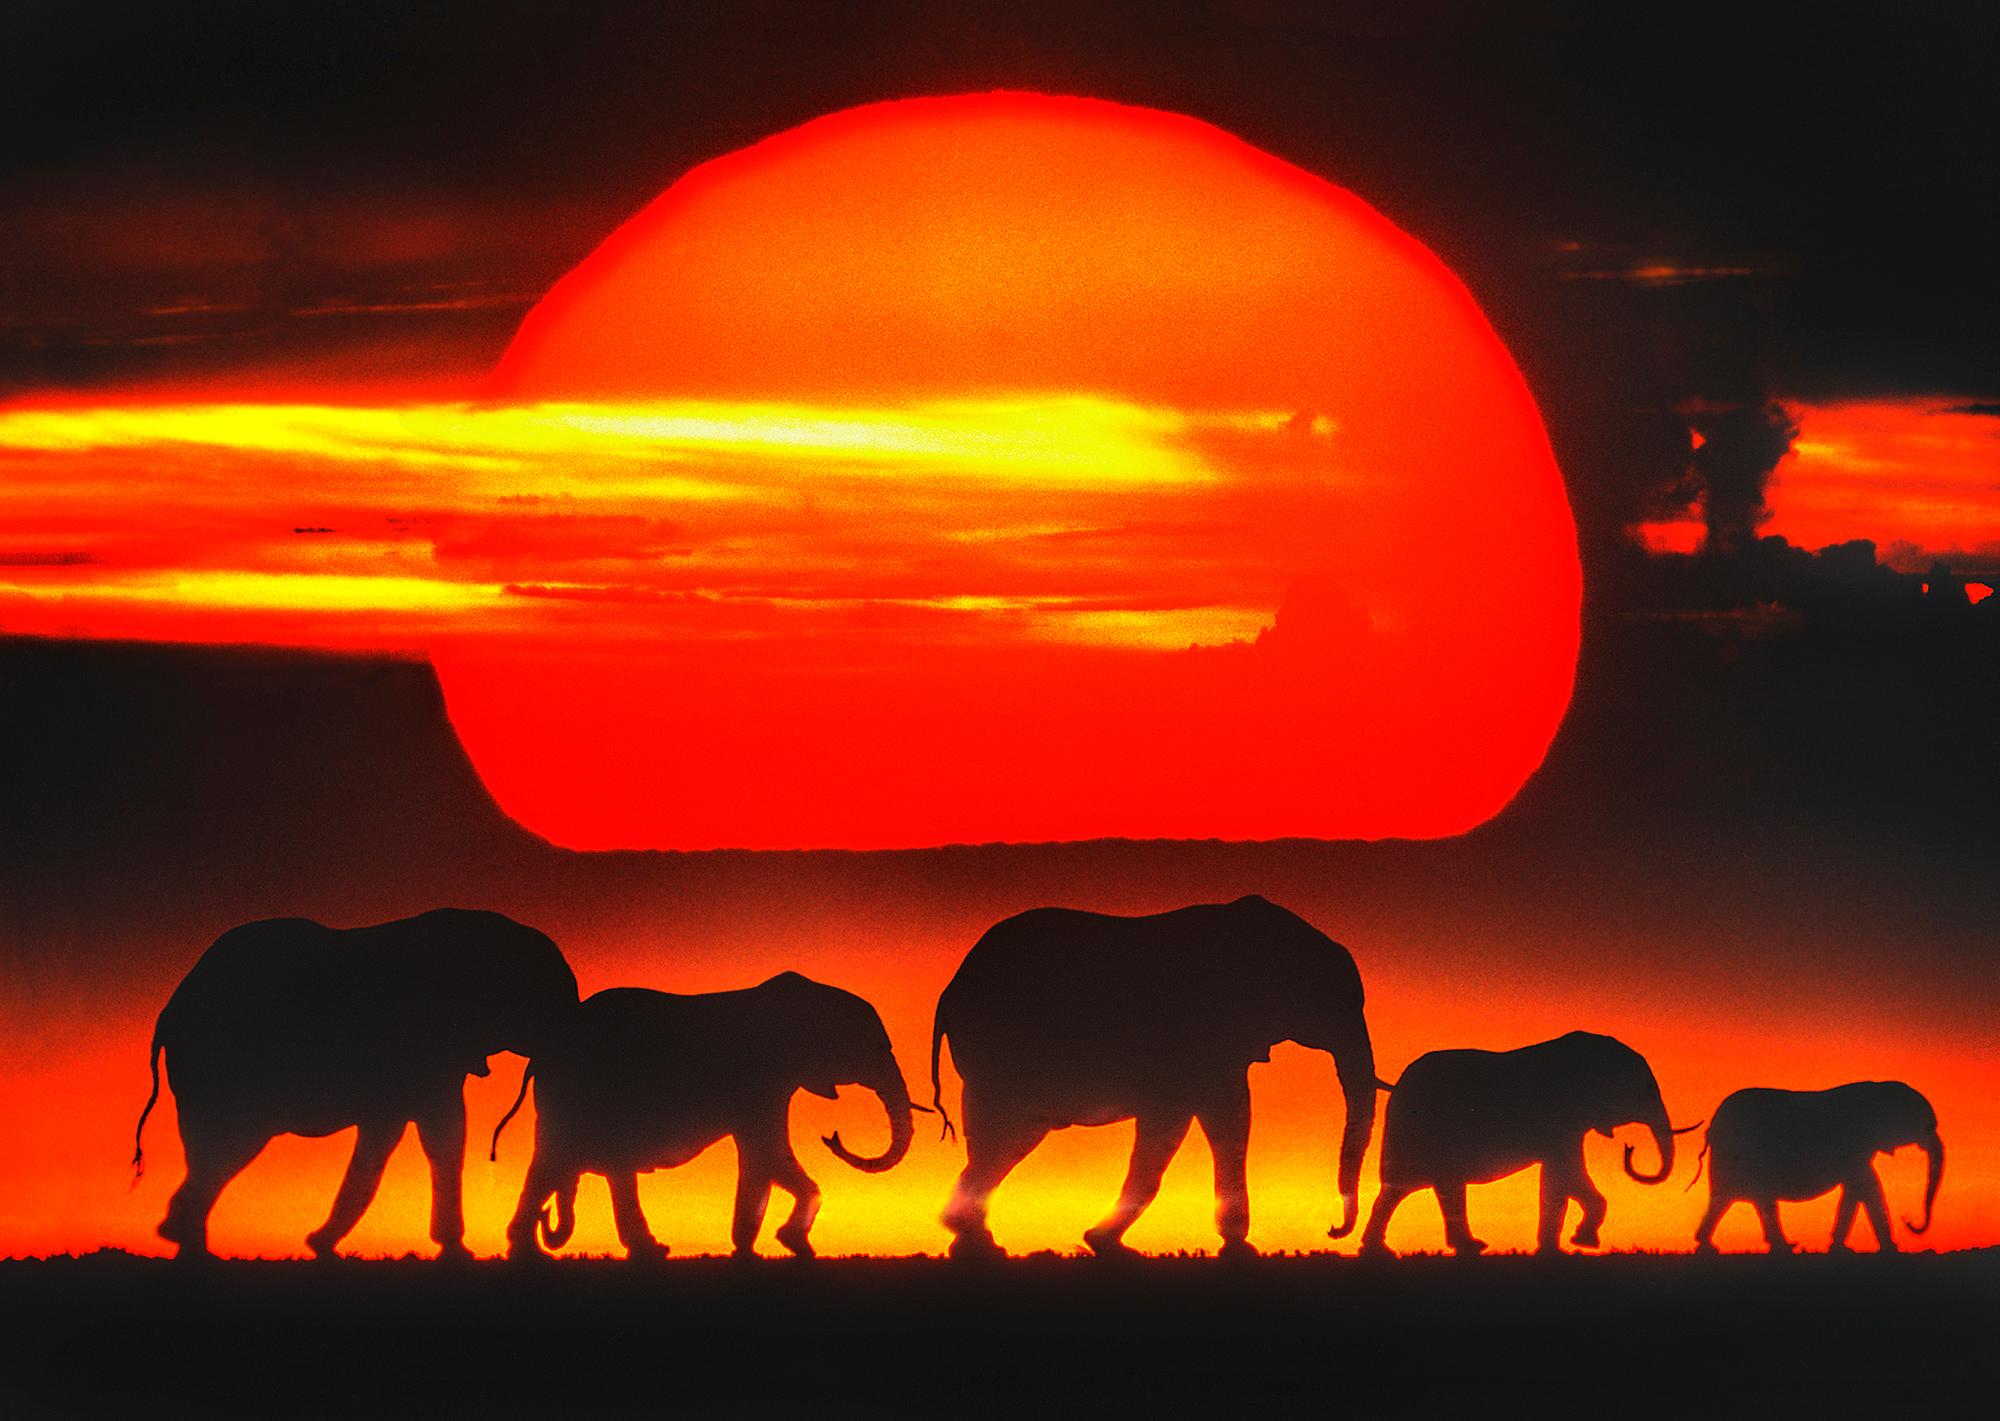 Mitchell Funk Landscape Photograph - Heard of Elephants on African Plane at Sunset